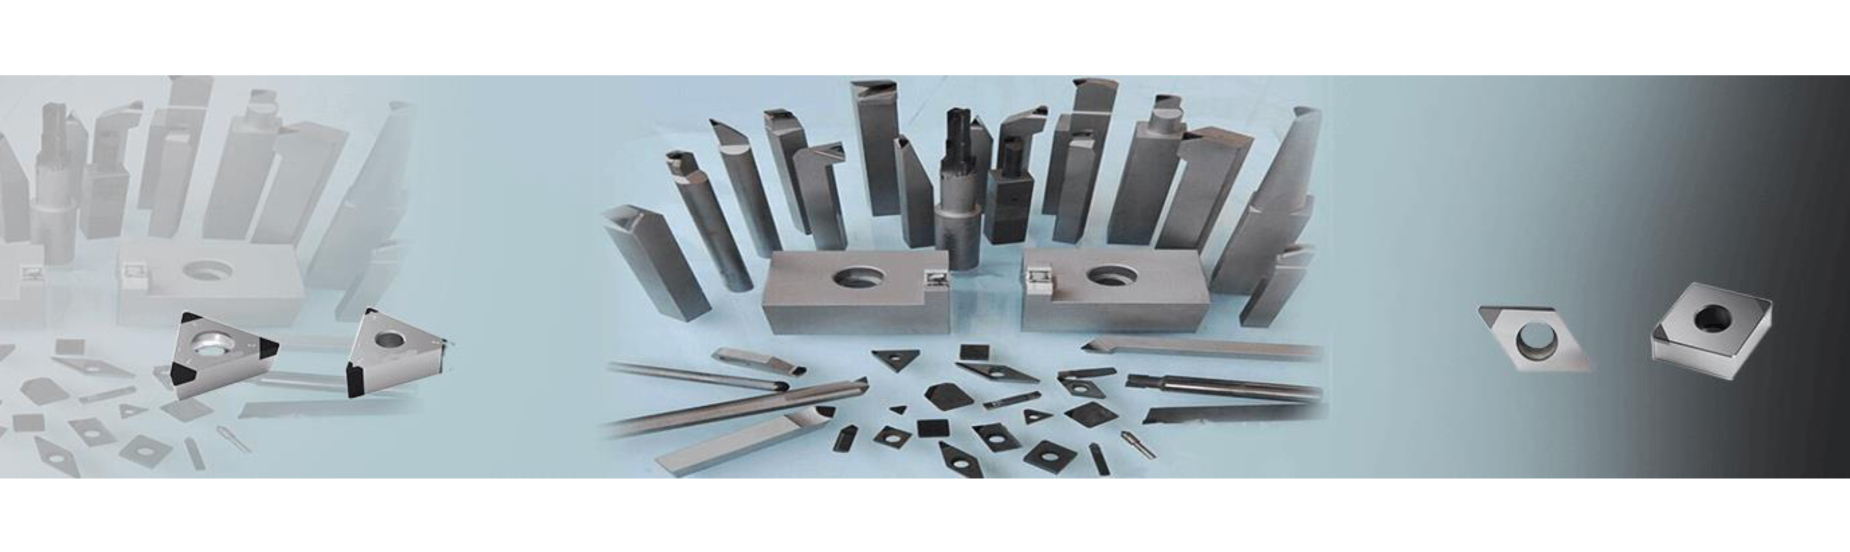 pcd-cbn-category-tools